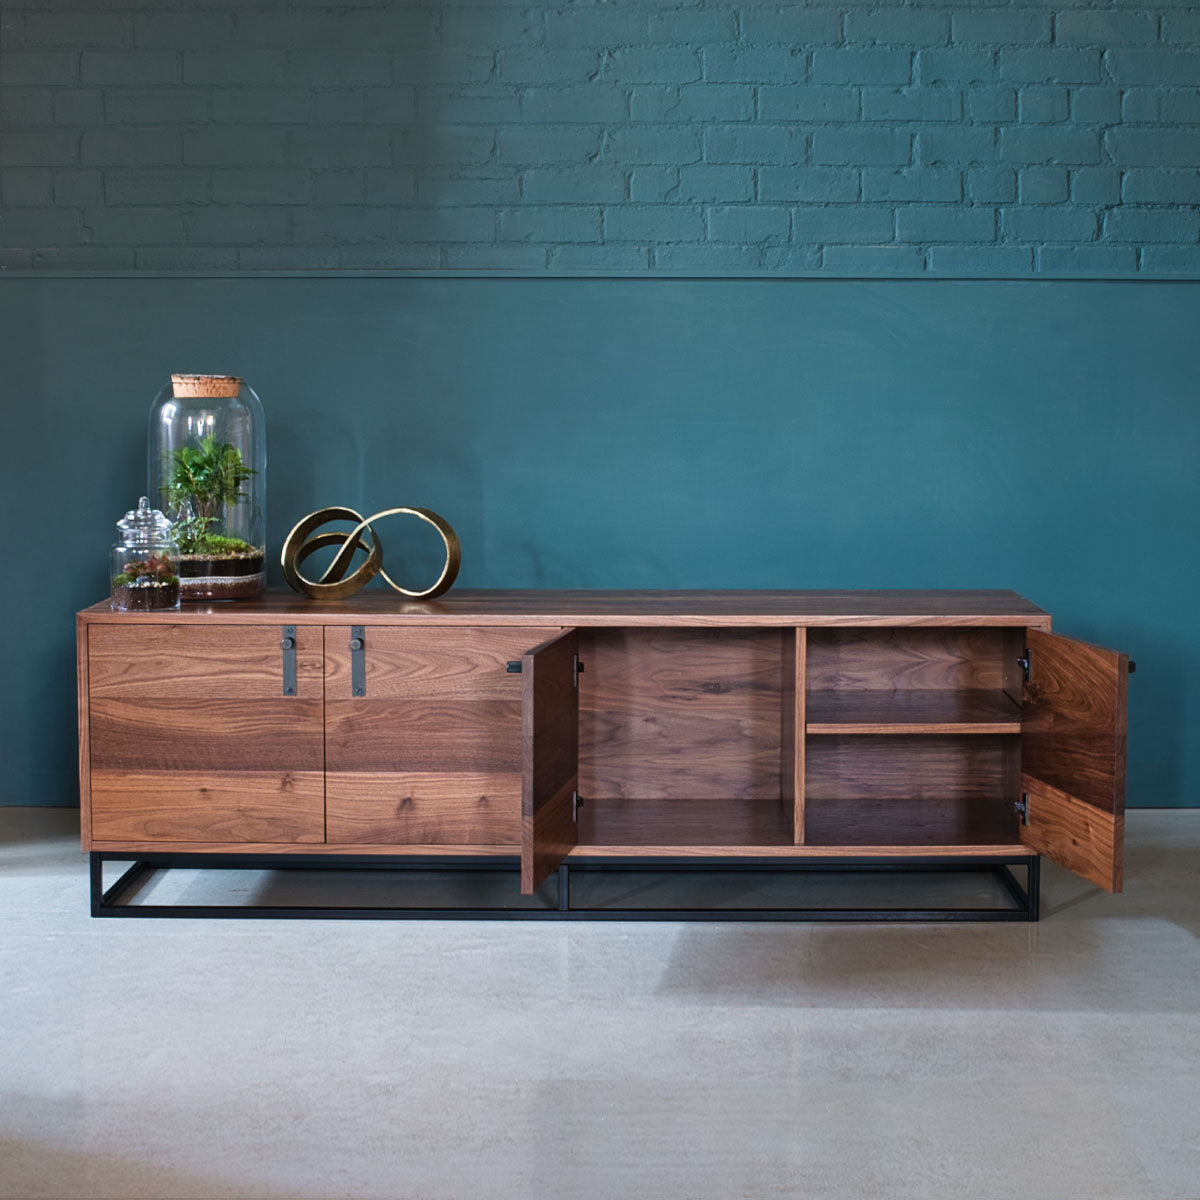 An image of the Walnut Media Unit, Valnot product available from Koda Studios